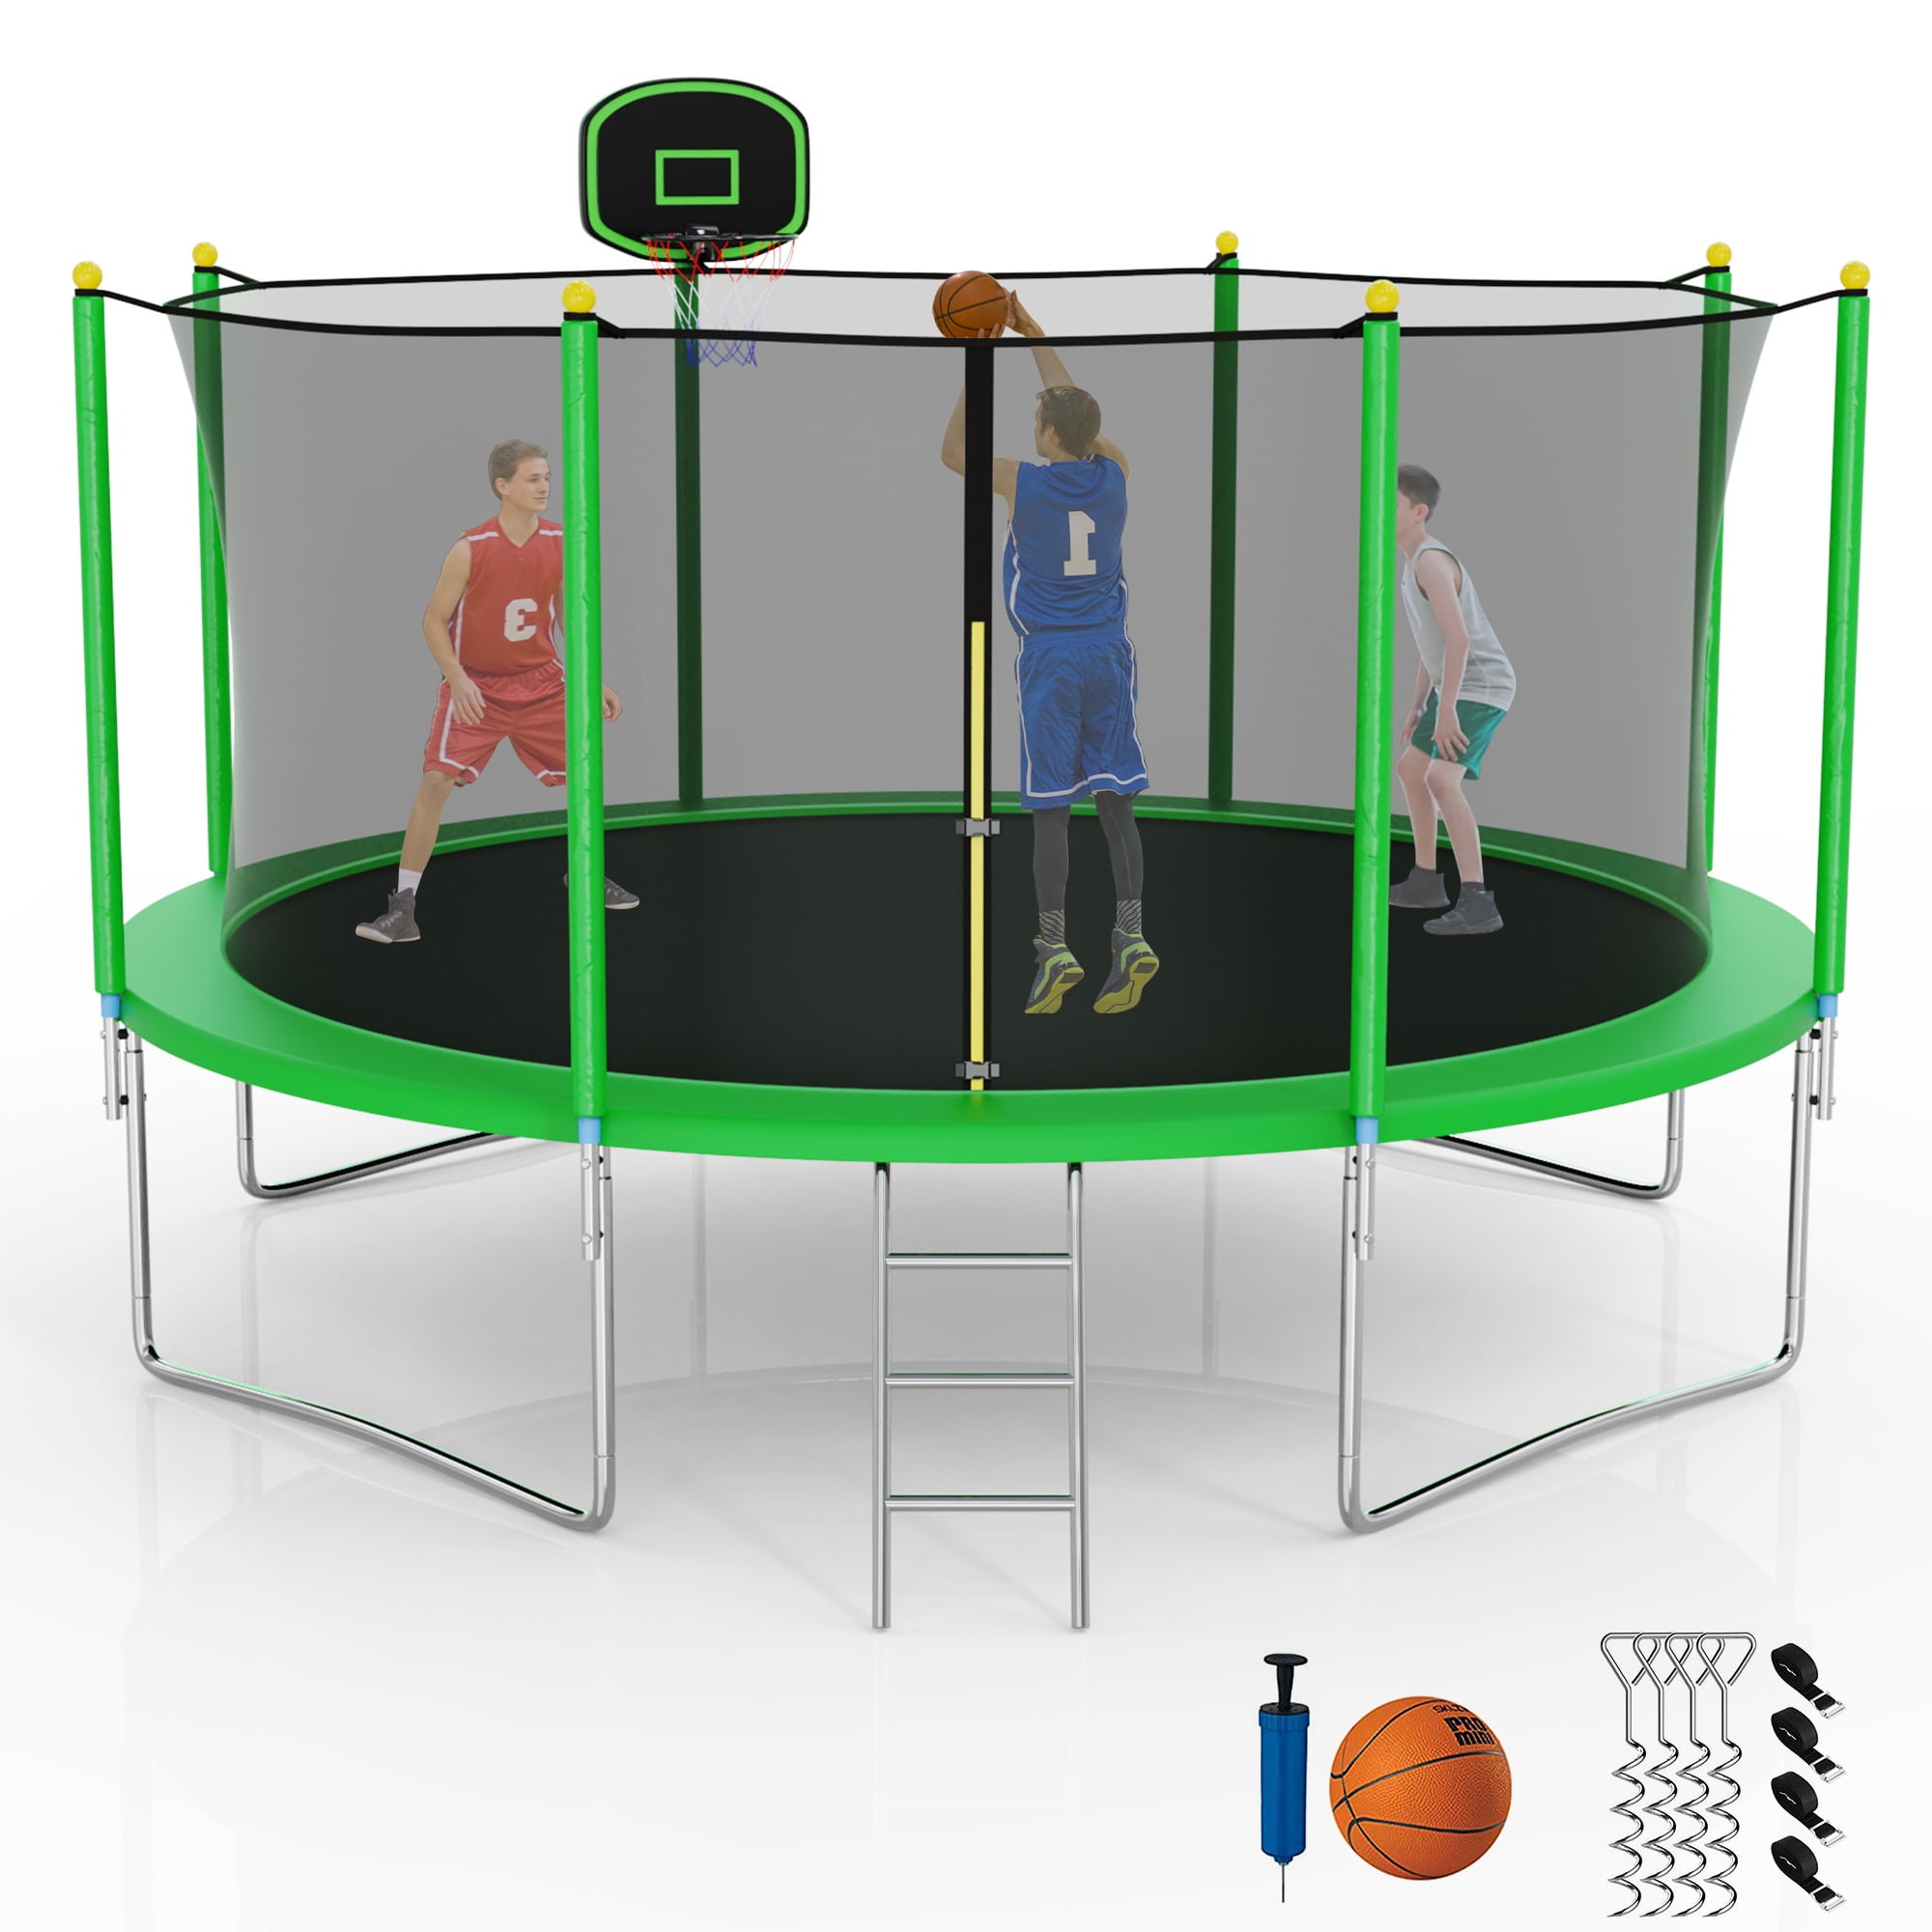 CITYLE 14FT 12FT Trampoline for Kids and Adults, No-Gap Design Heavy ...